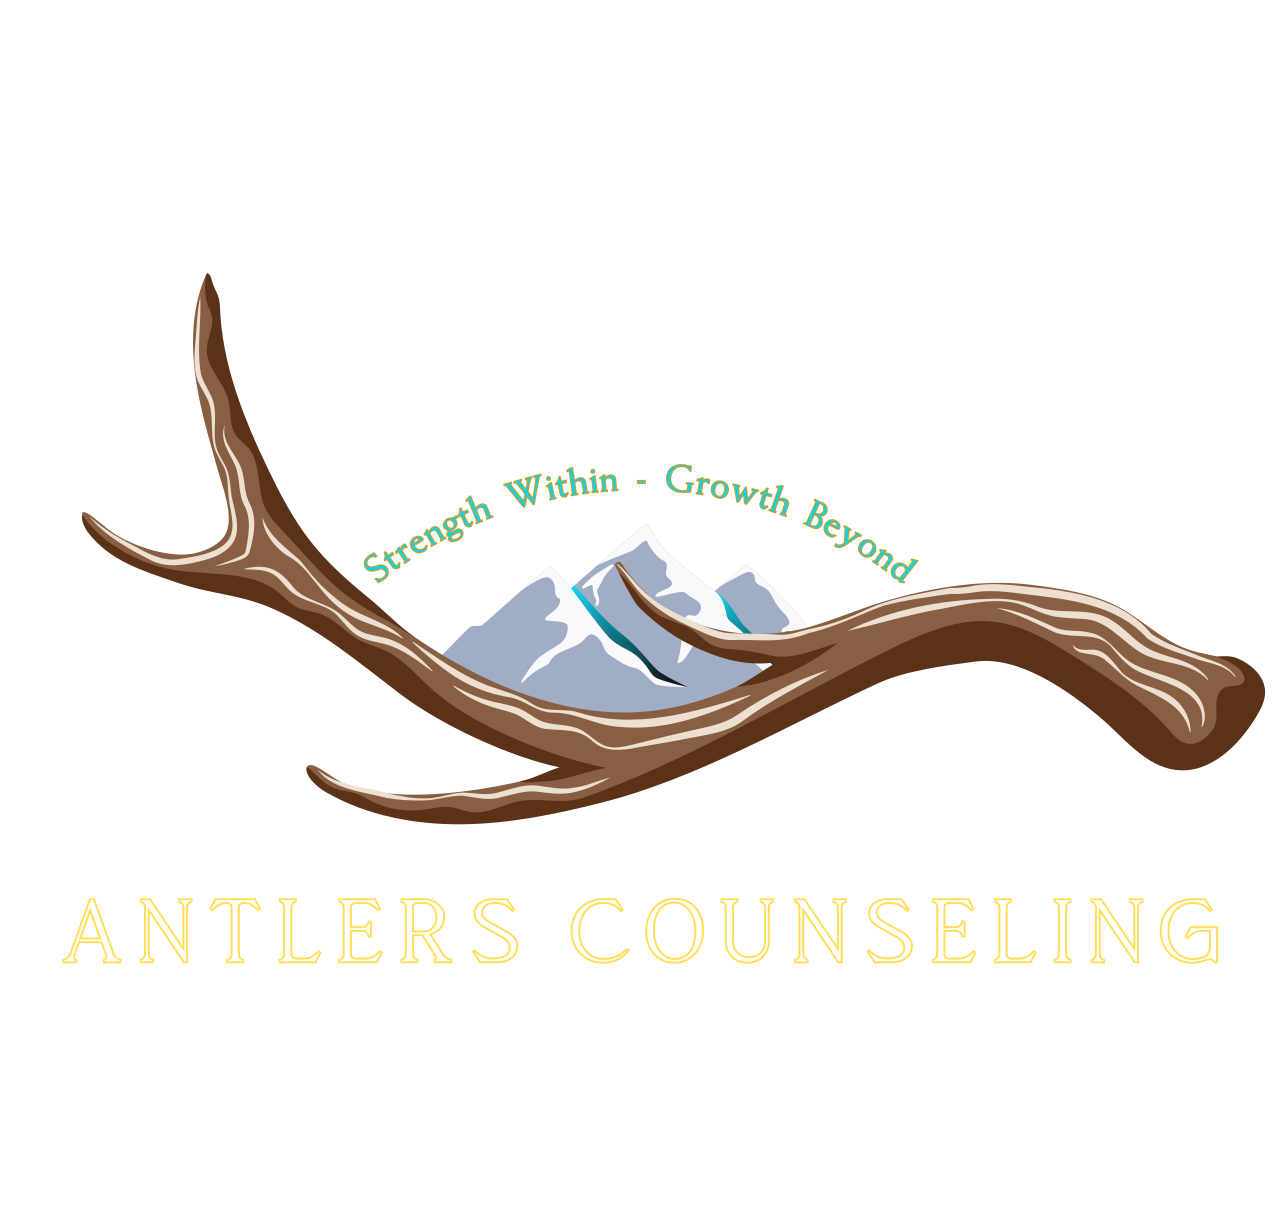 Antlers Counseling's logo